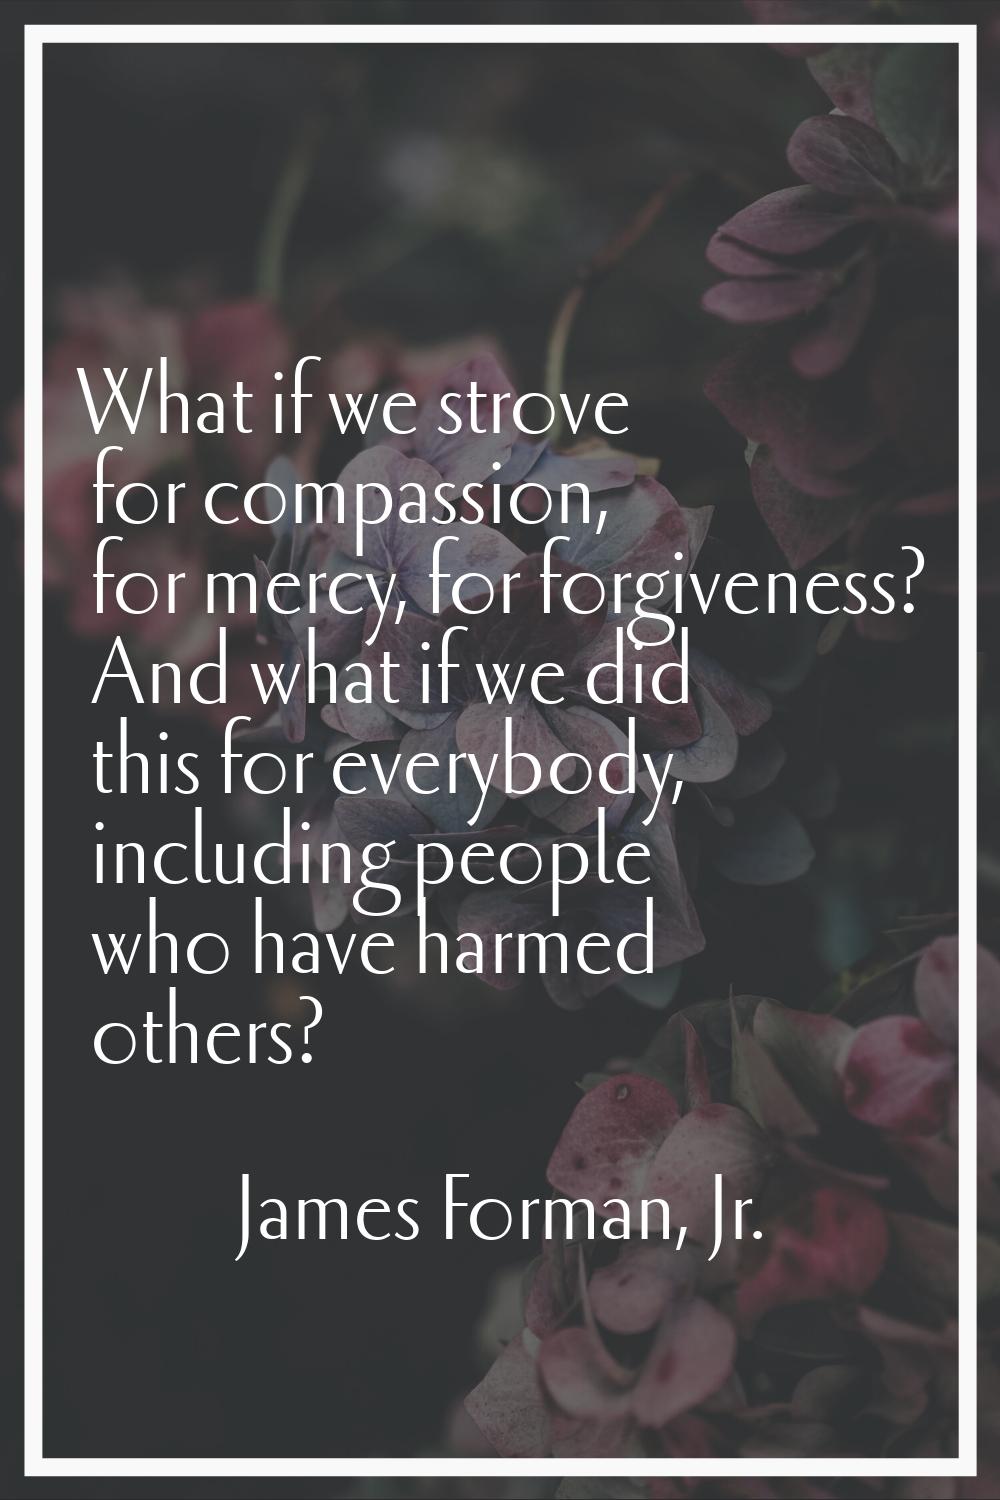 What if we strove for compassion, for mercy, for forgiveness? And what if we did this for everybody